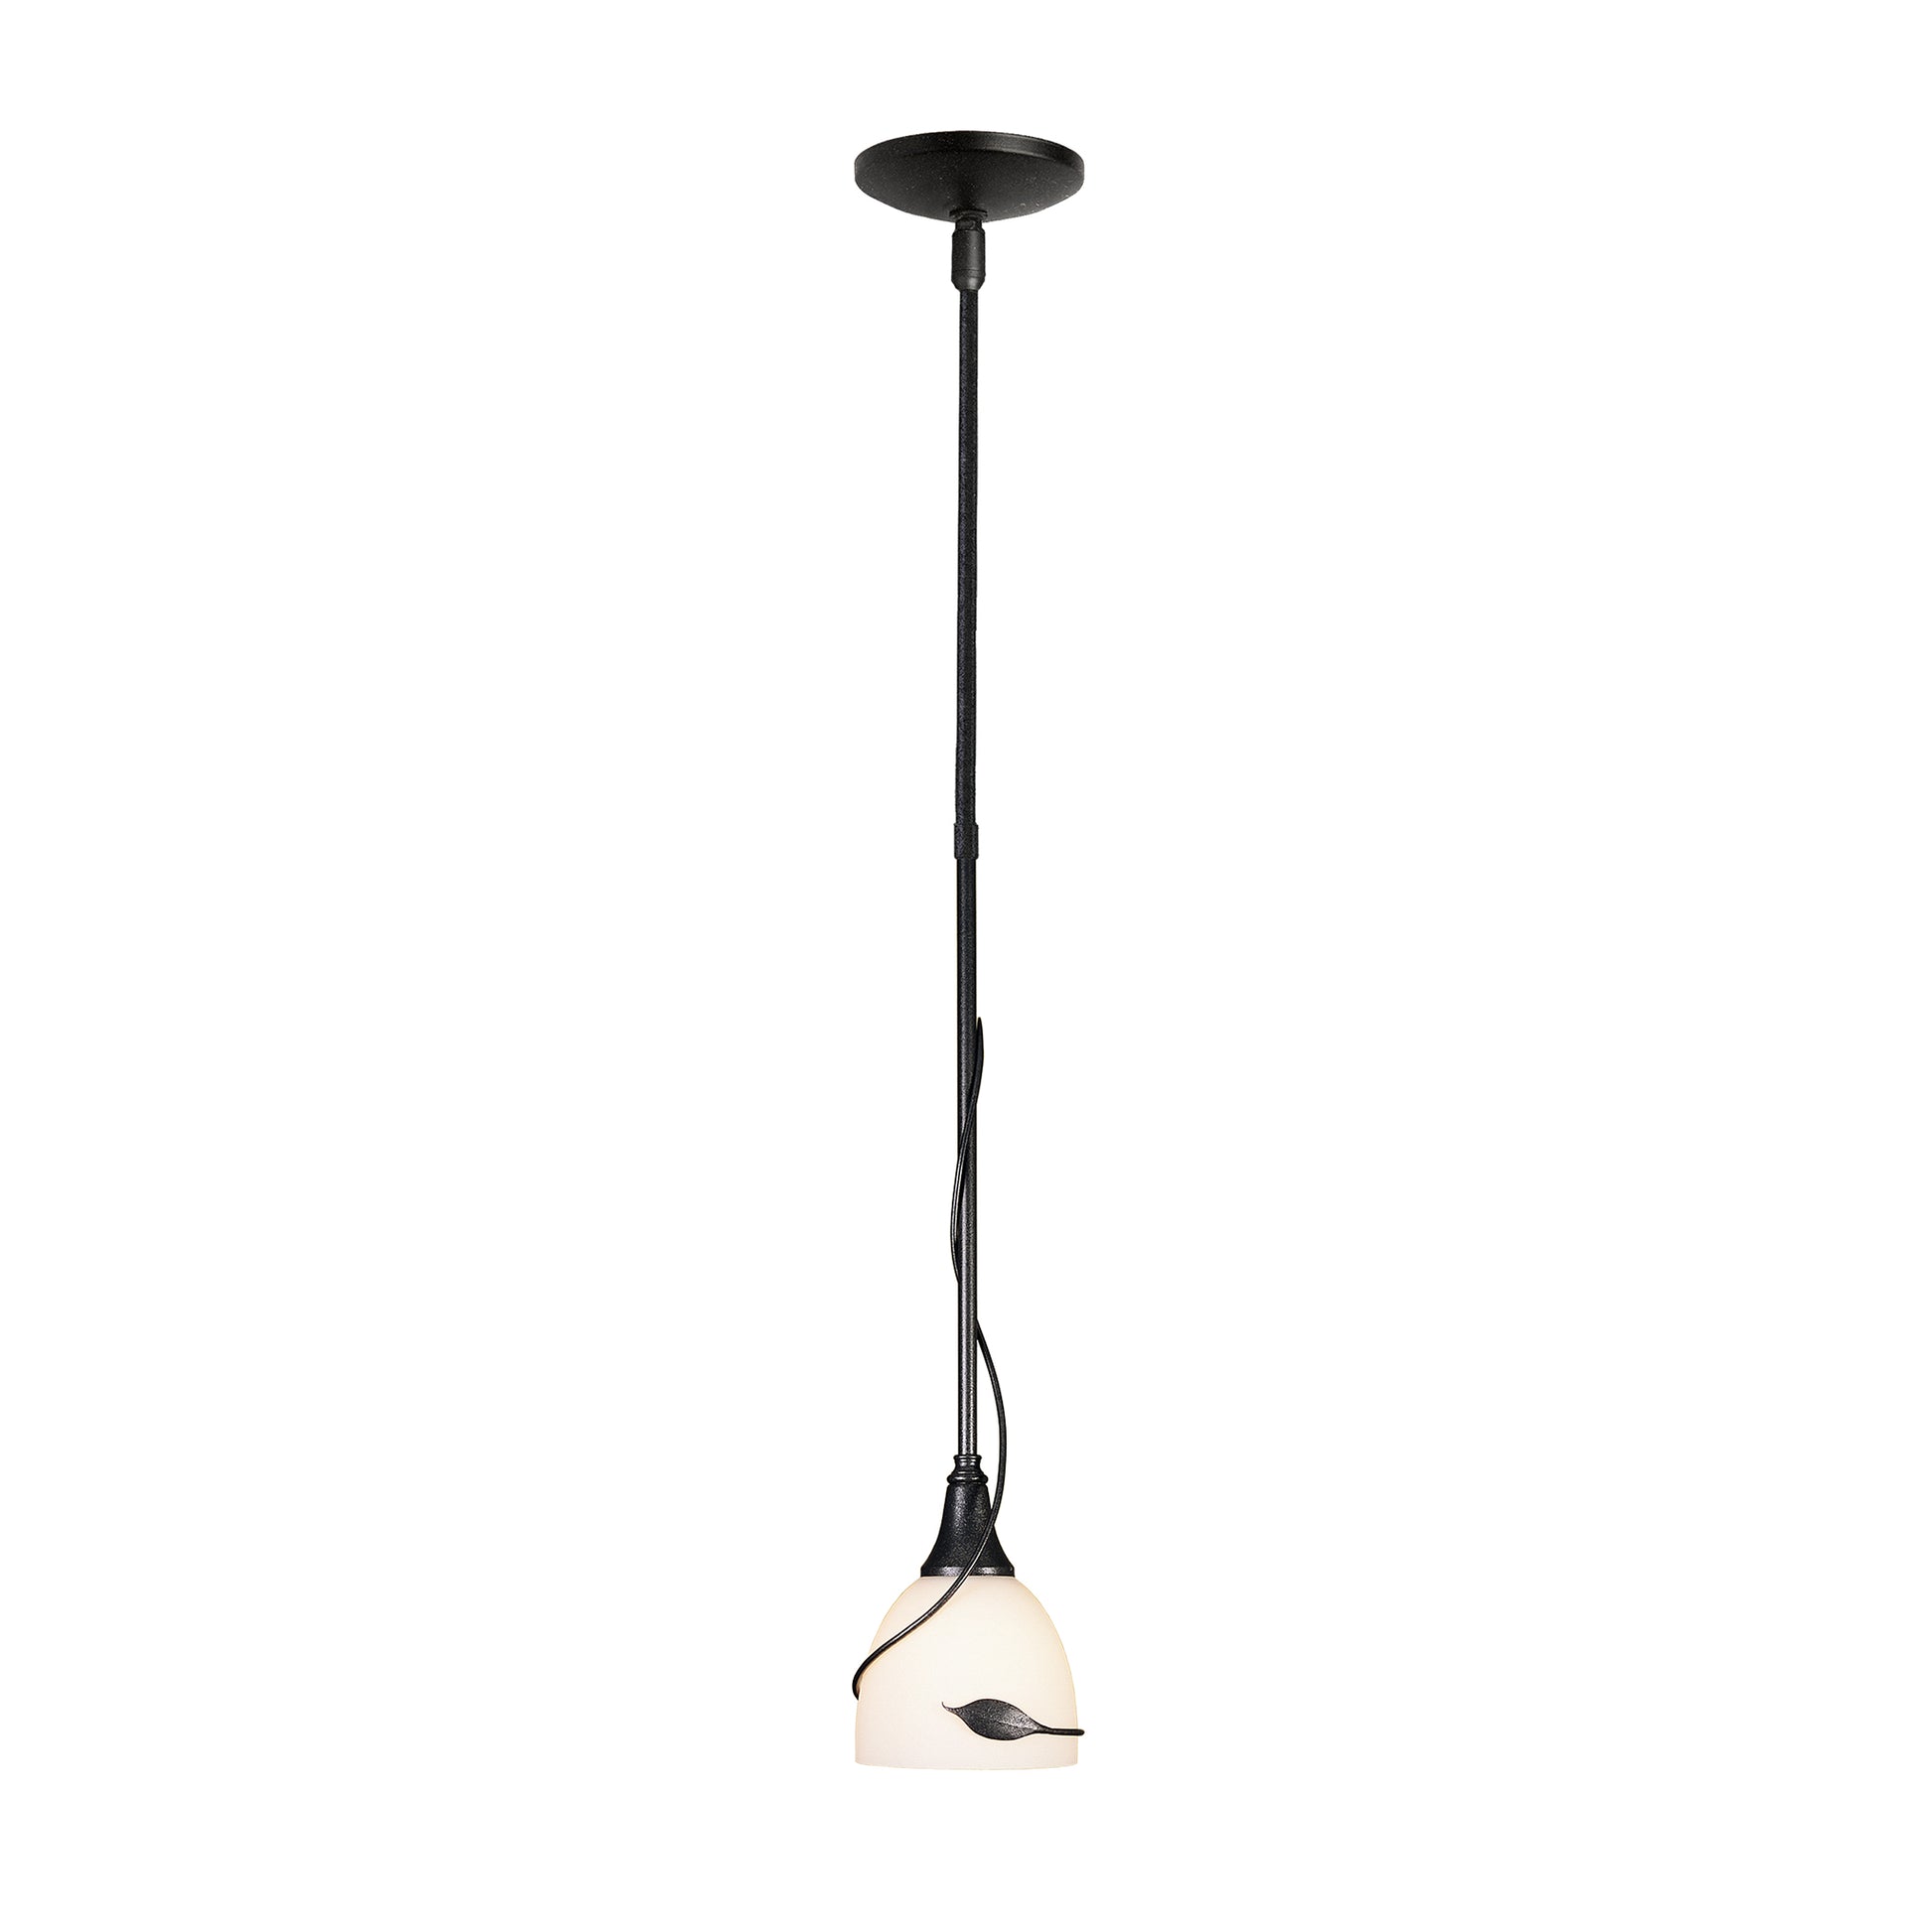 A handcrafted in Vermont, USA Twining Leaf Mini Pendant with a white glass shade from Hubbardton Forge lighting.